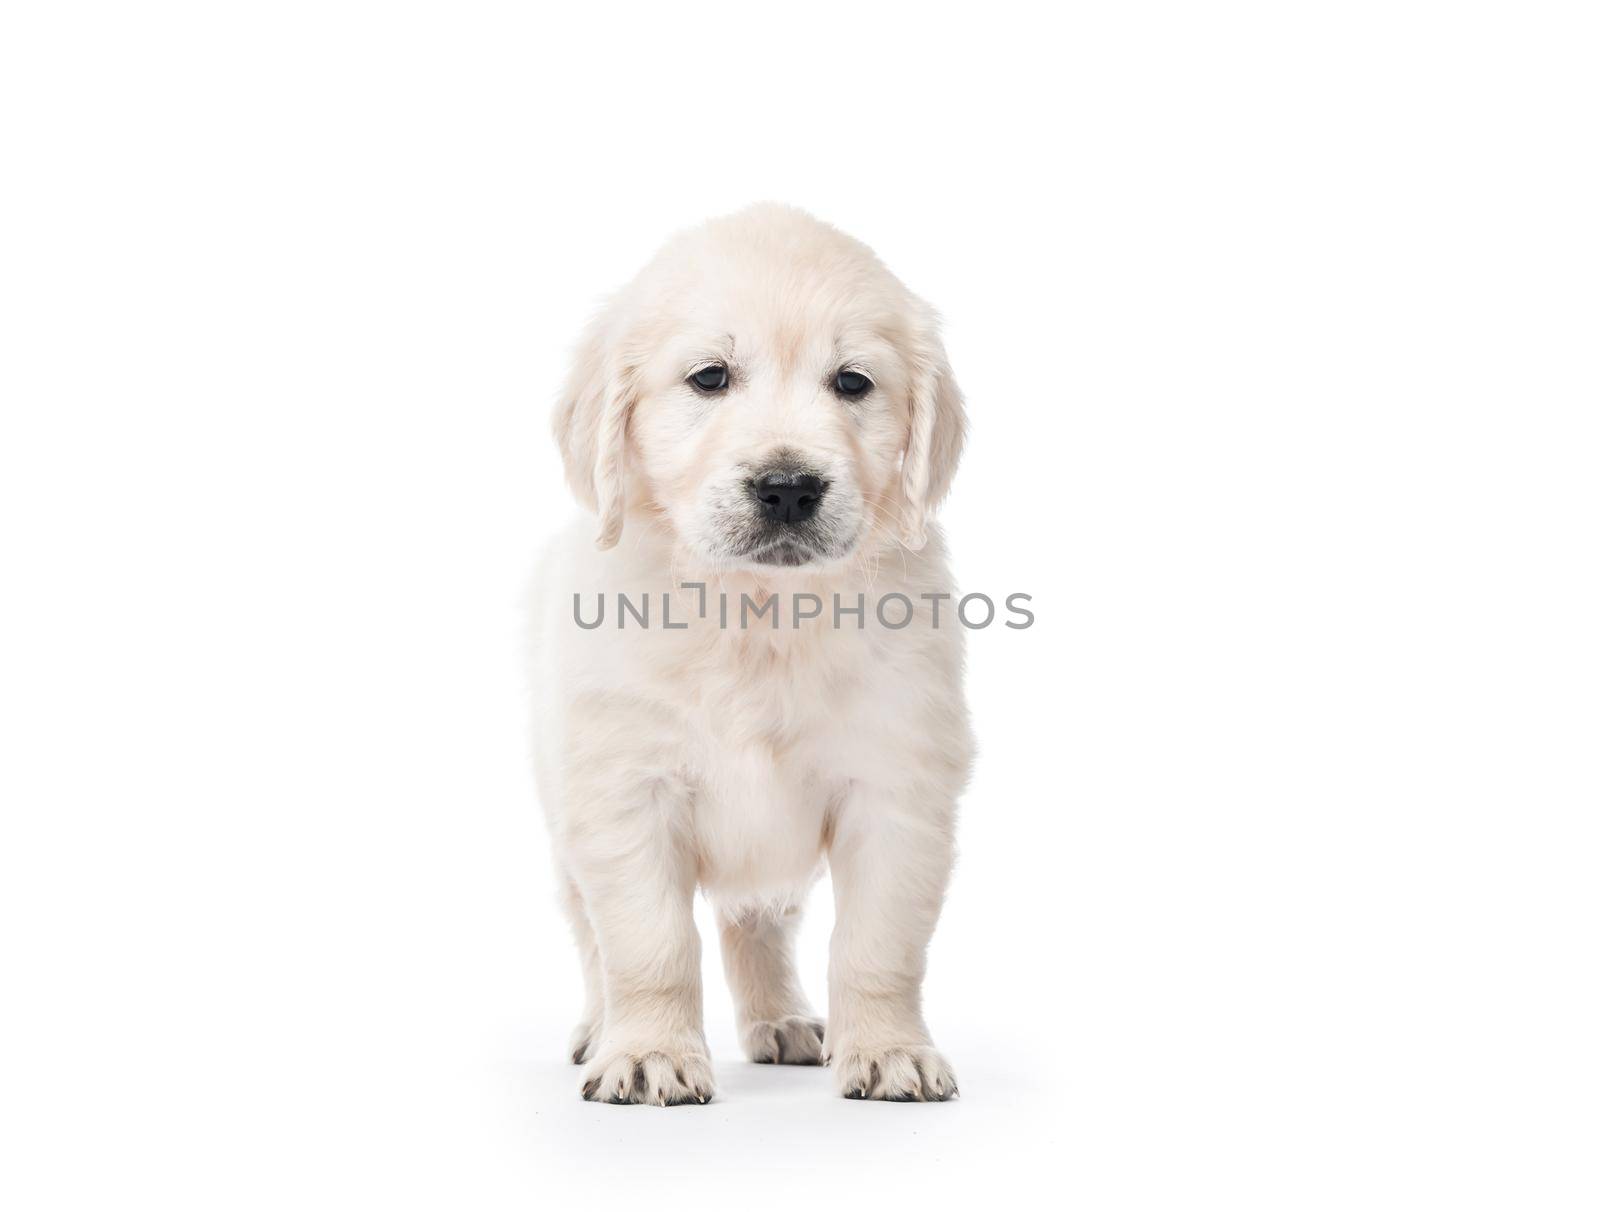 Little golden retriever puppy side view isolated on white background